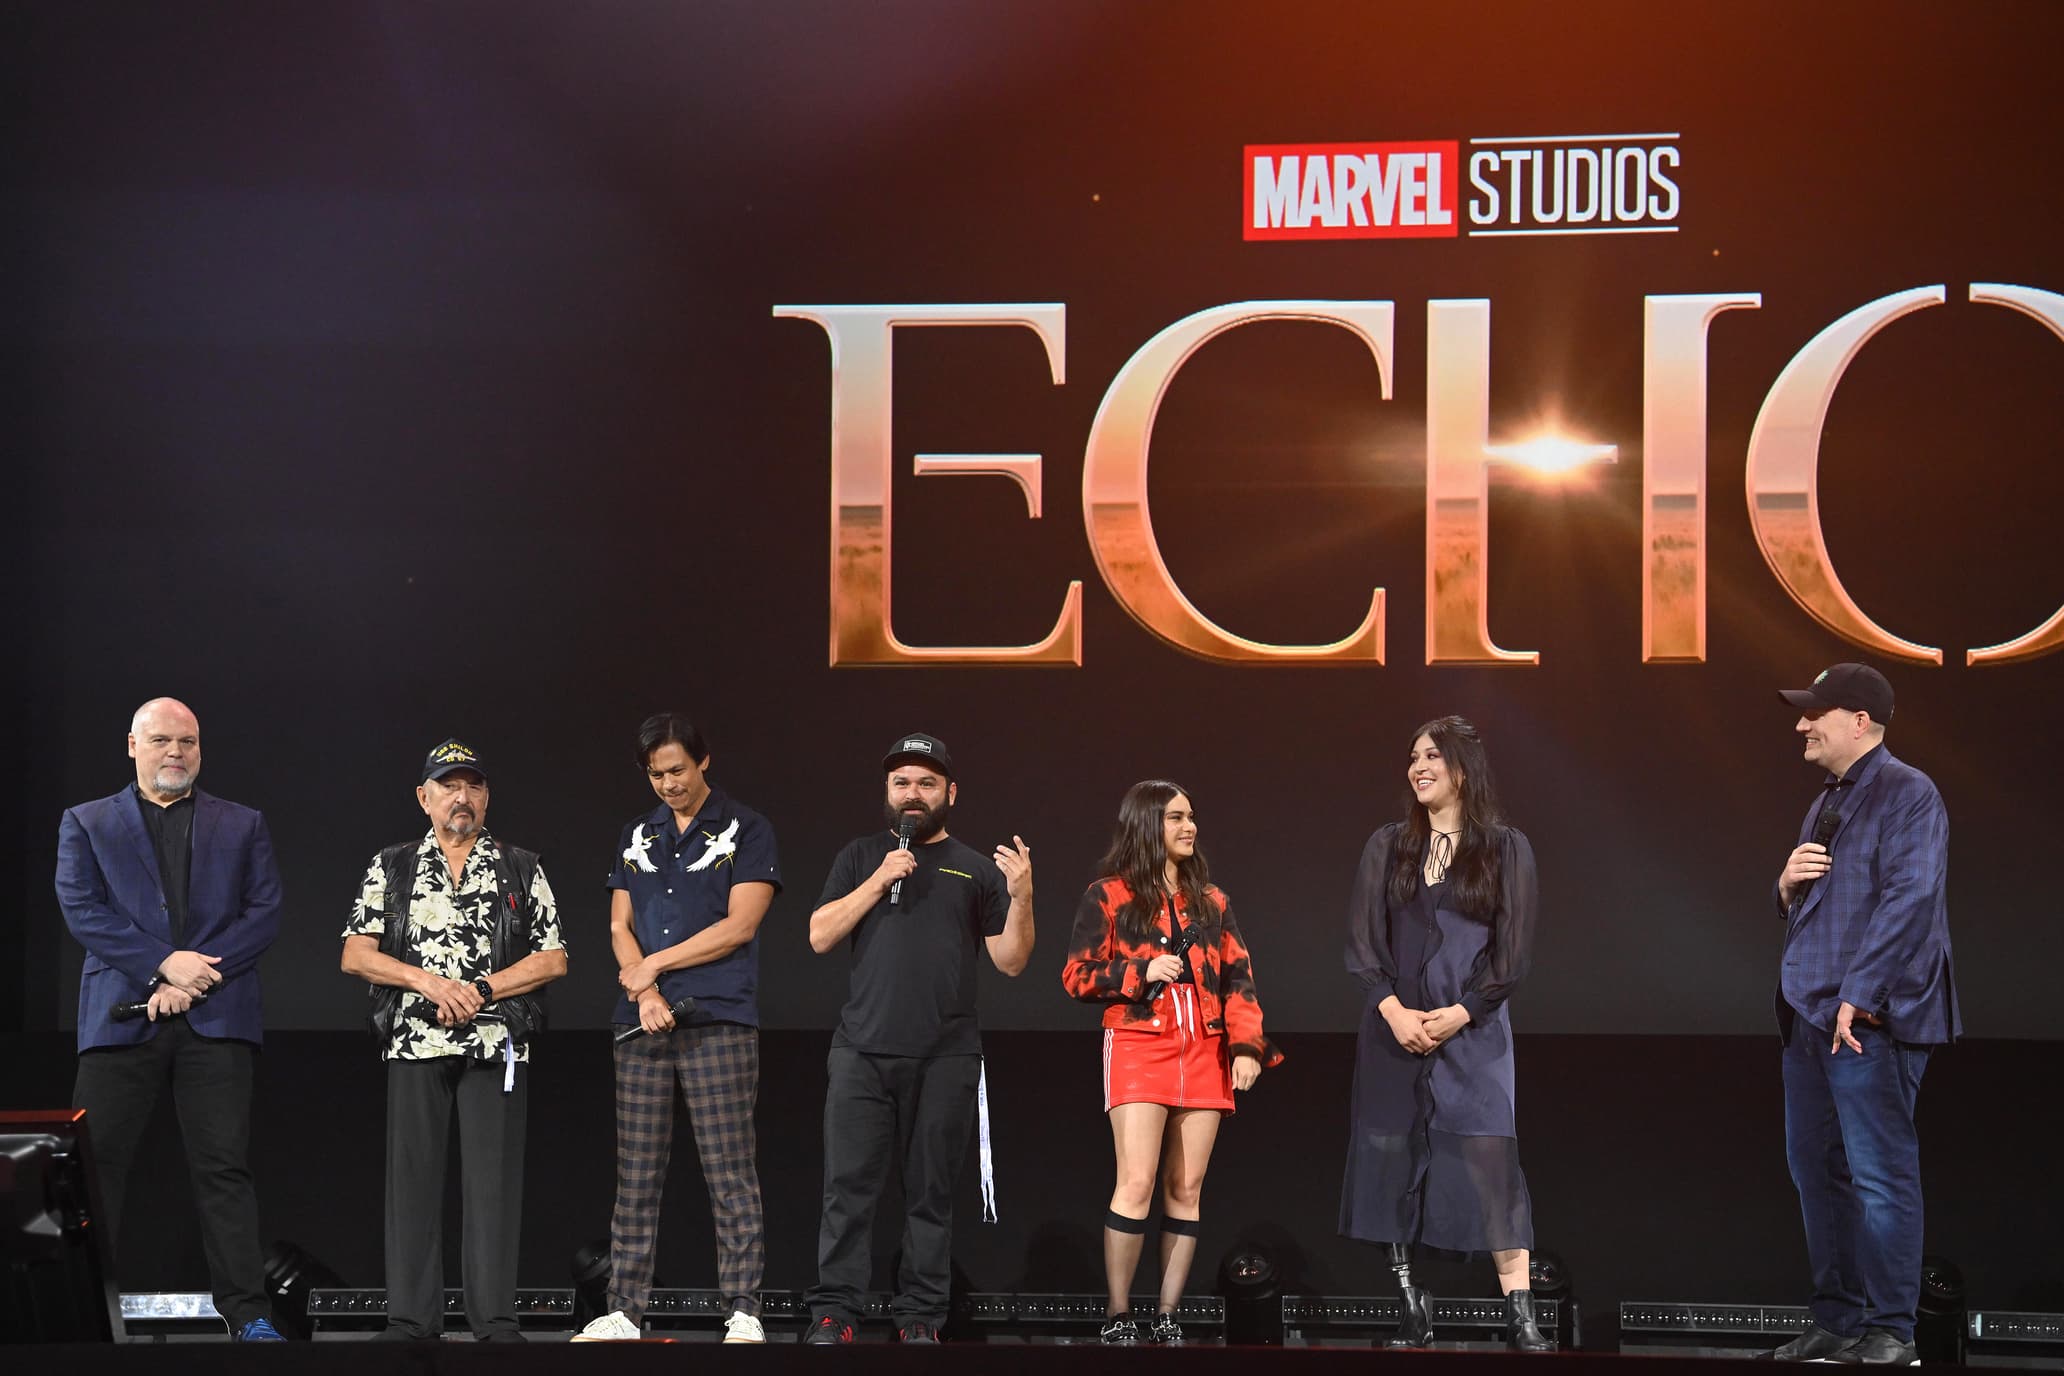 The cast of ECHO